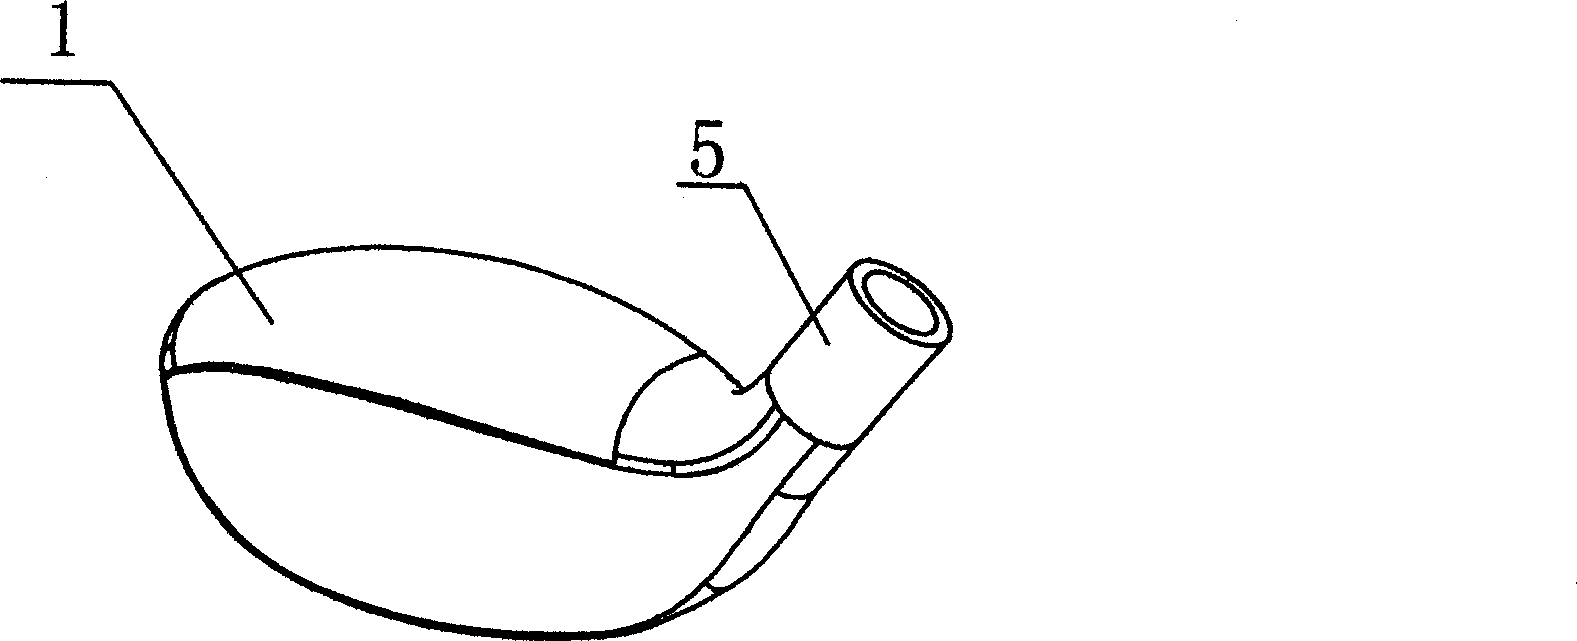 Improved manufacture method of one-piece golf bar head and products thereof